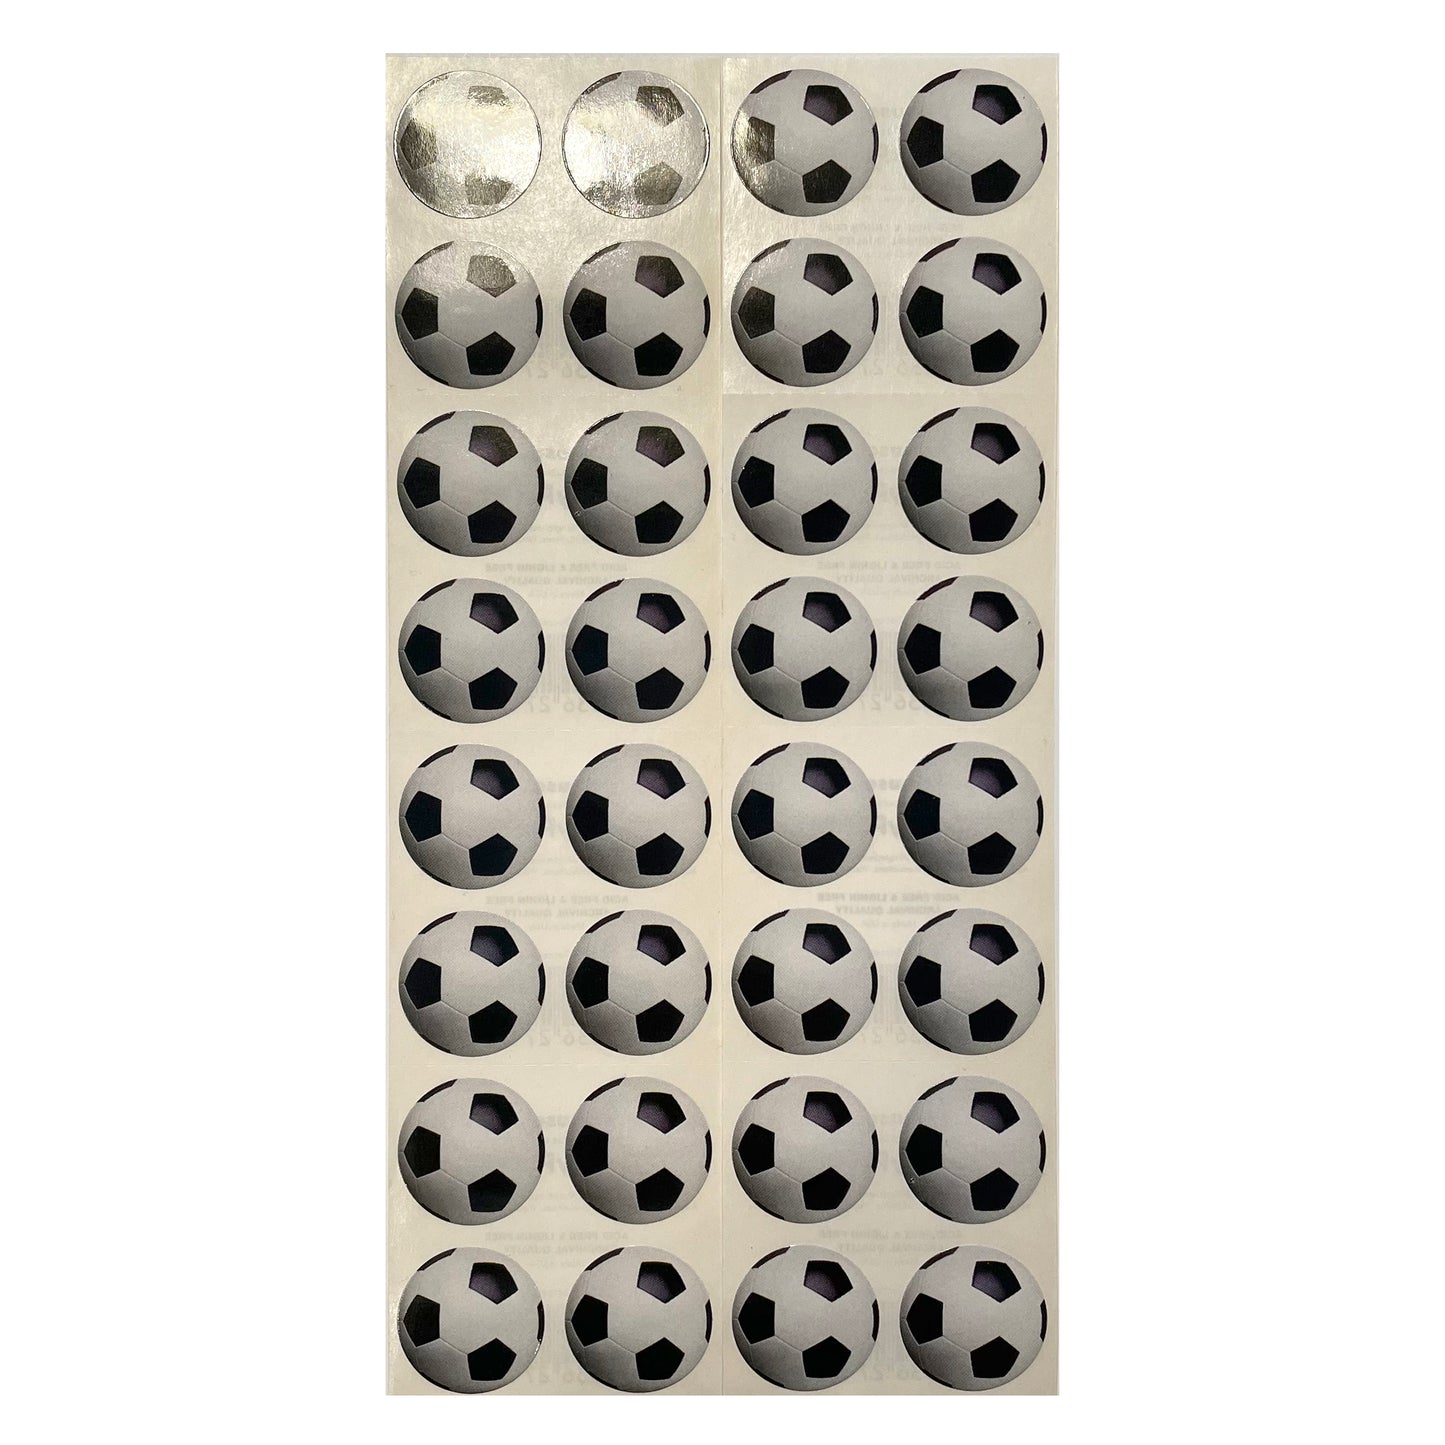 DEALS: 20 Sheets of Soccer Stickers